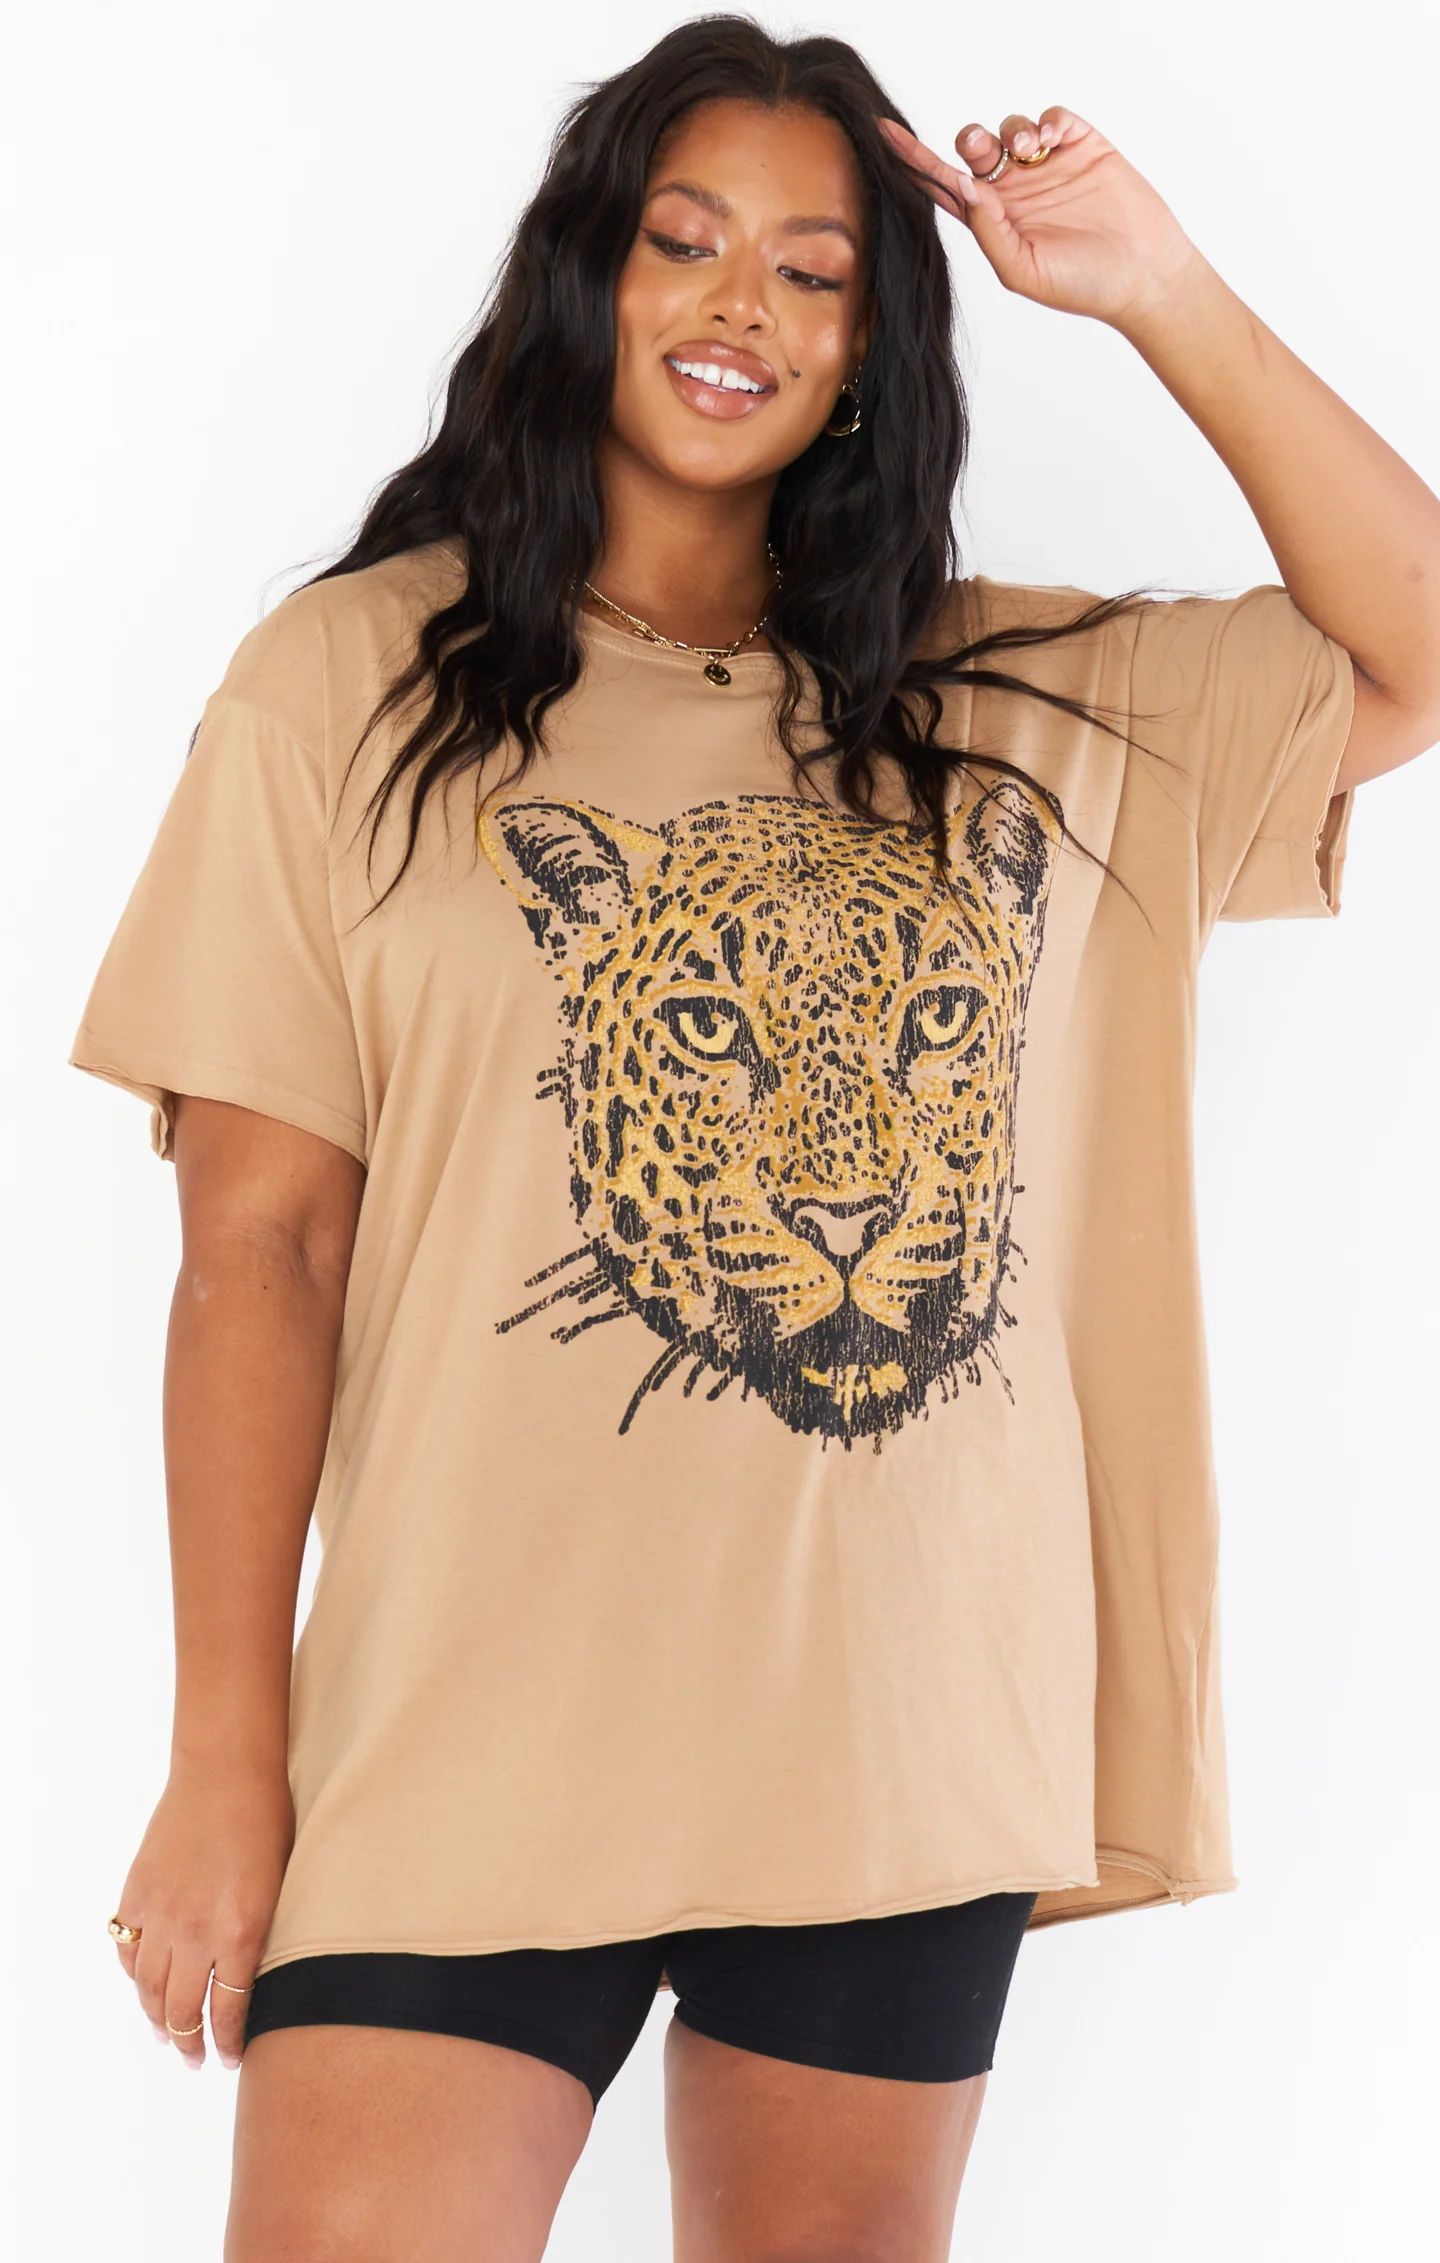 Airport Tee ~ Leopard Head Graphic | Show Me Your Mumu